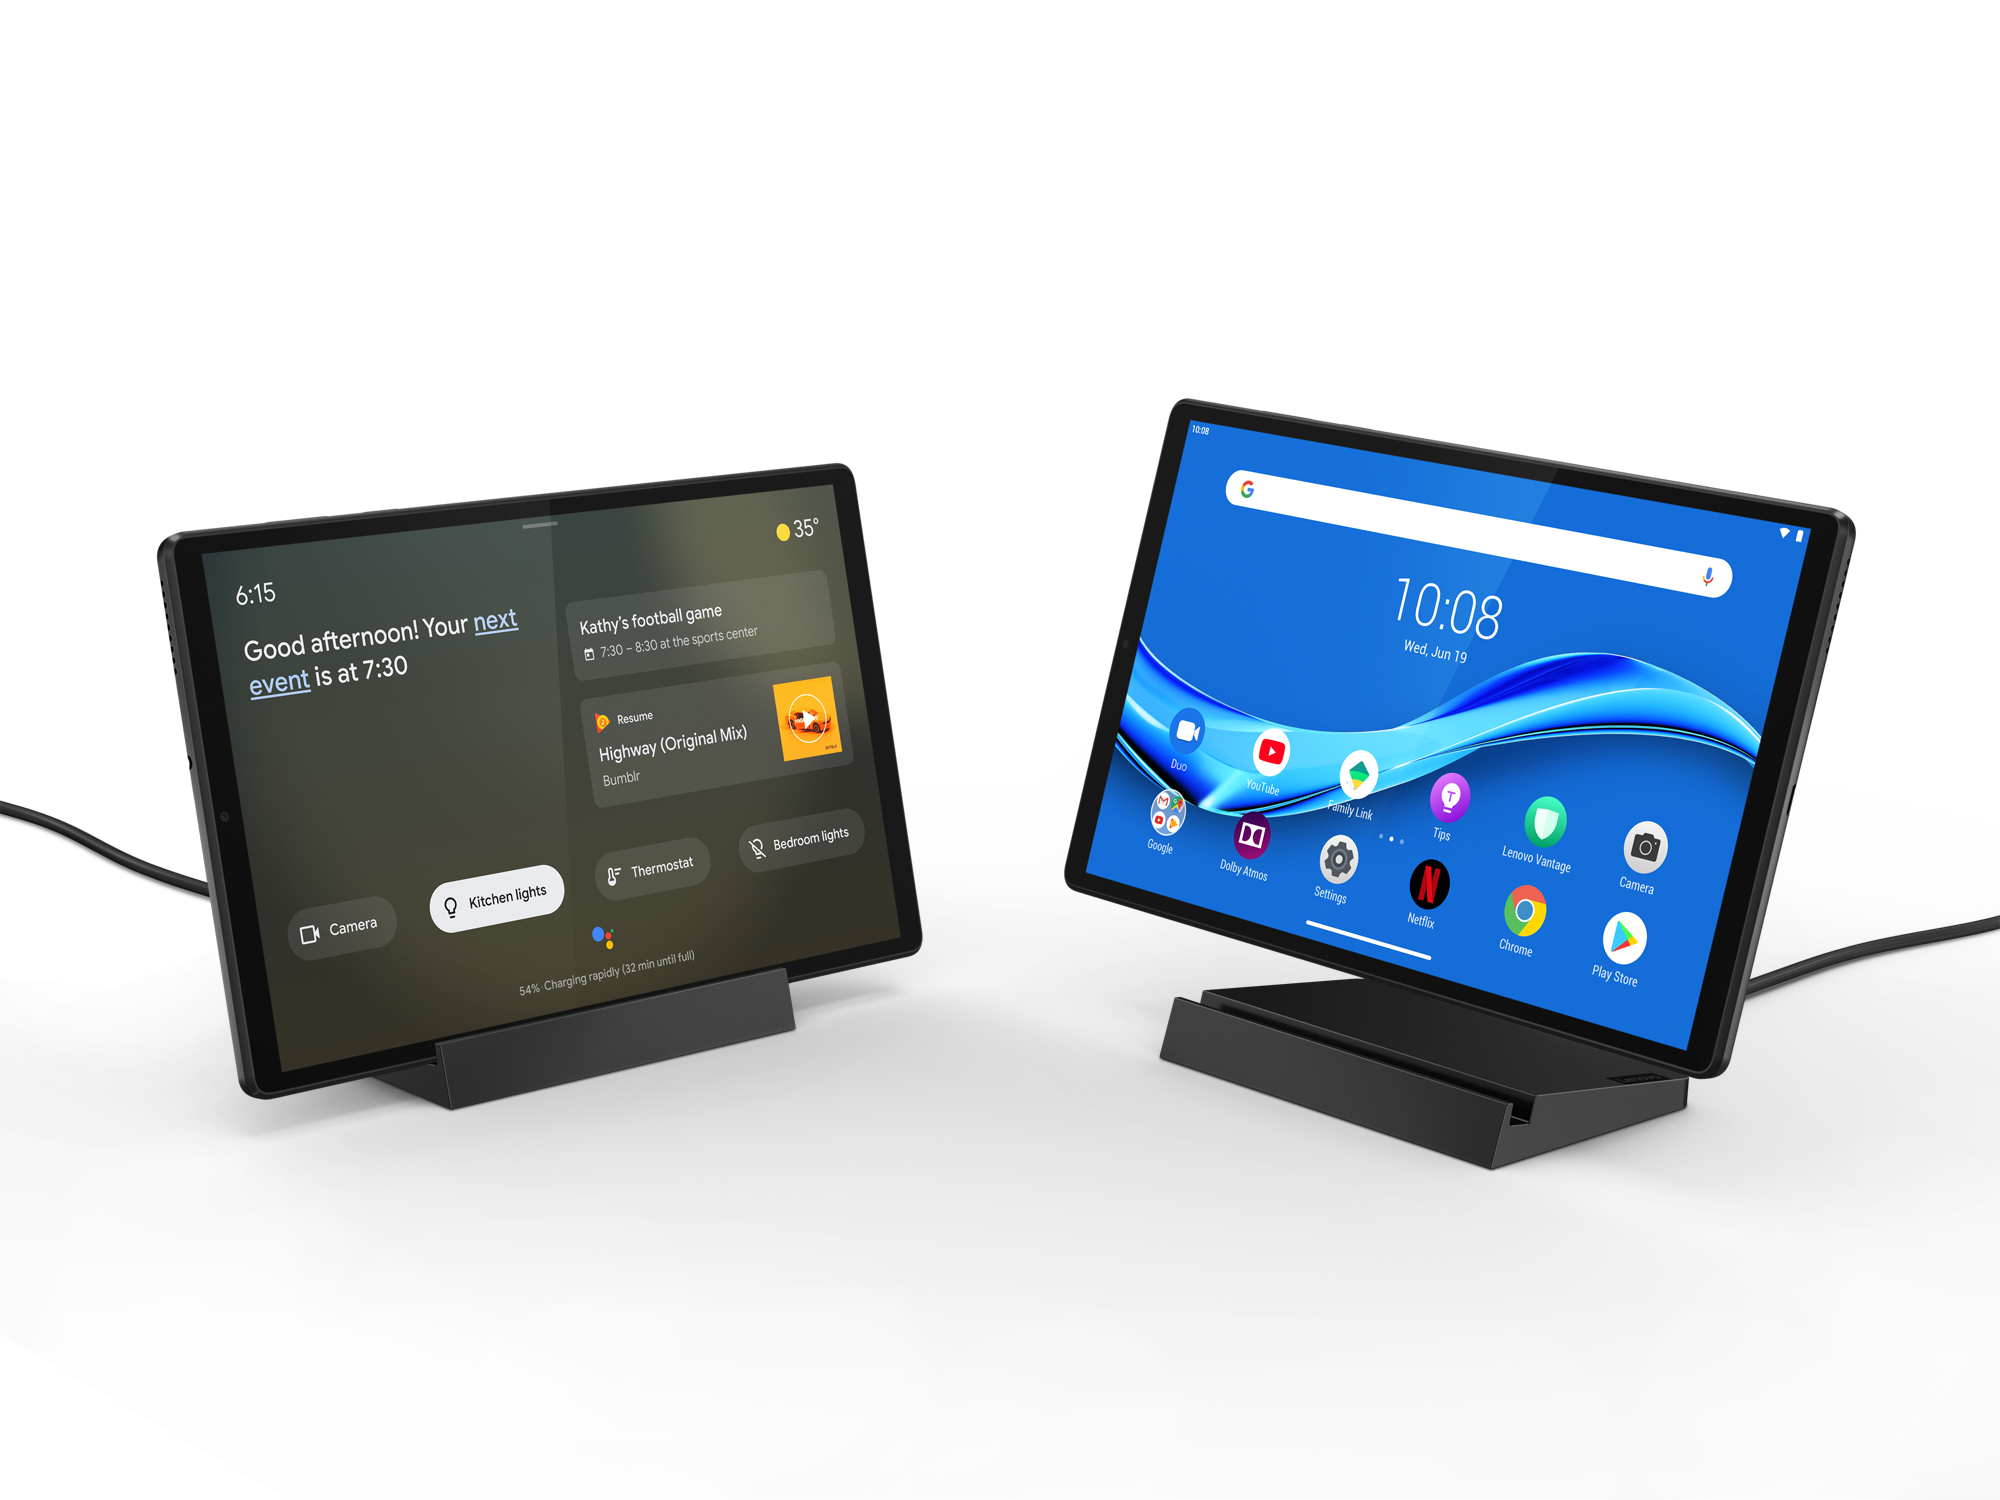 Lenovo Smart Tab M10 FHD Plus 2nd Gen with Google Assistant